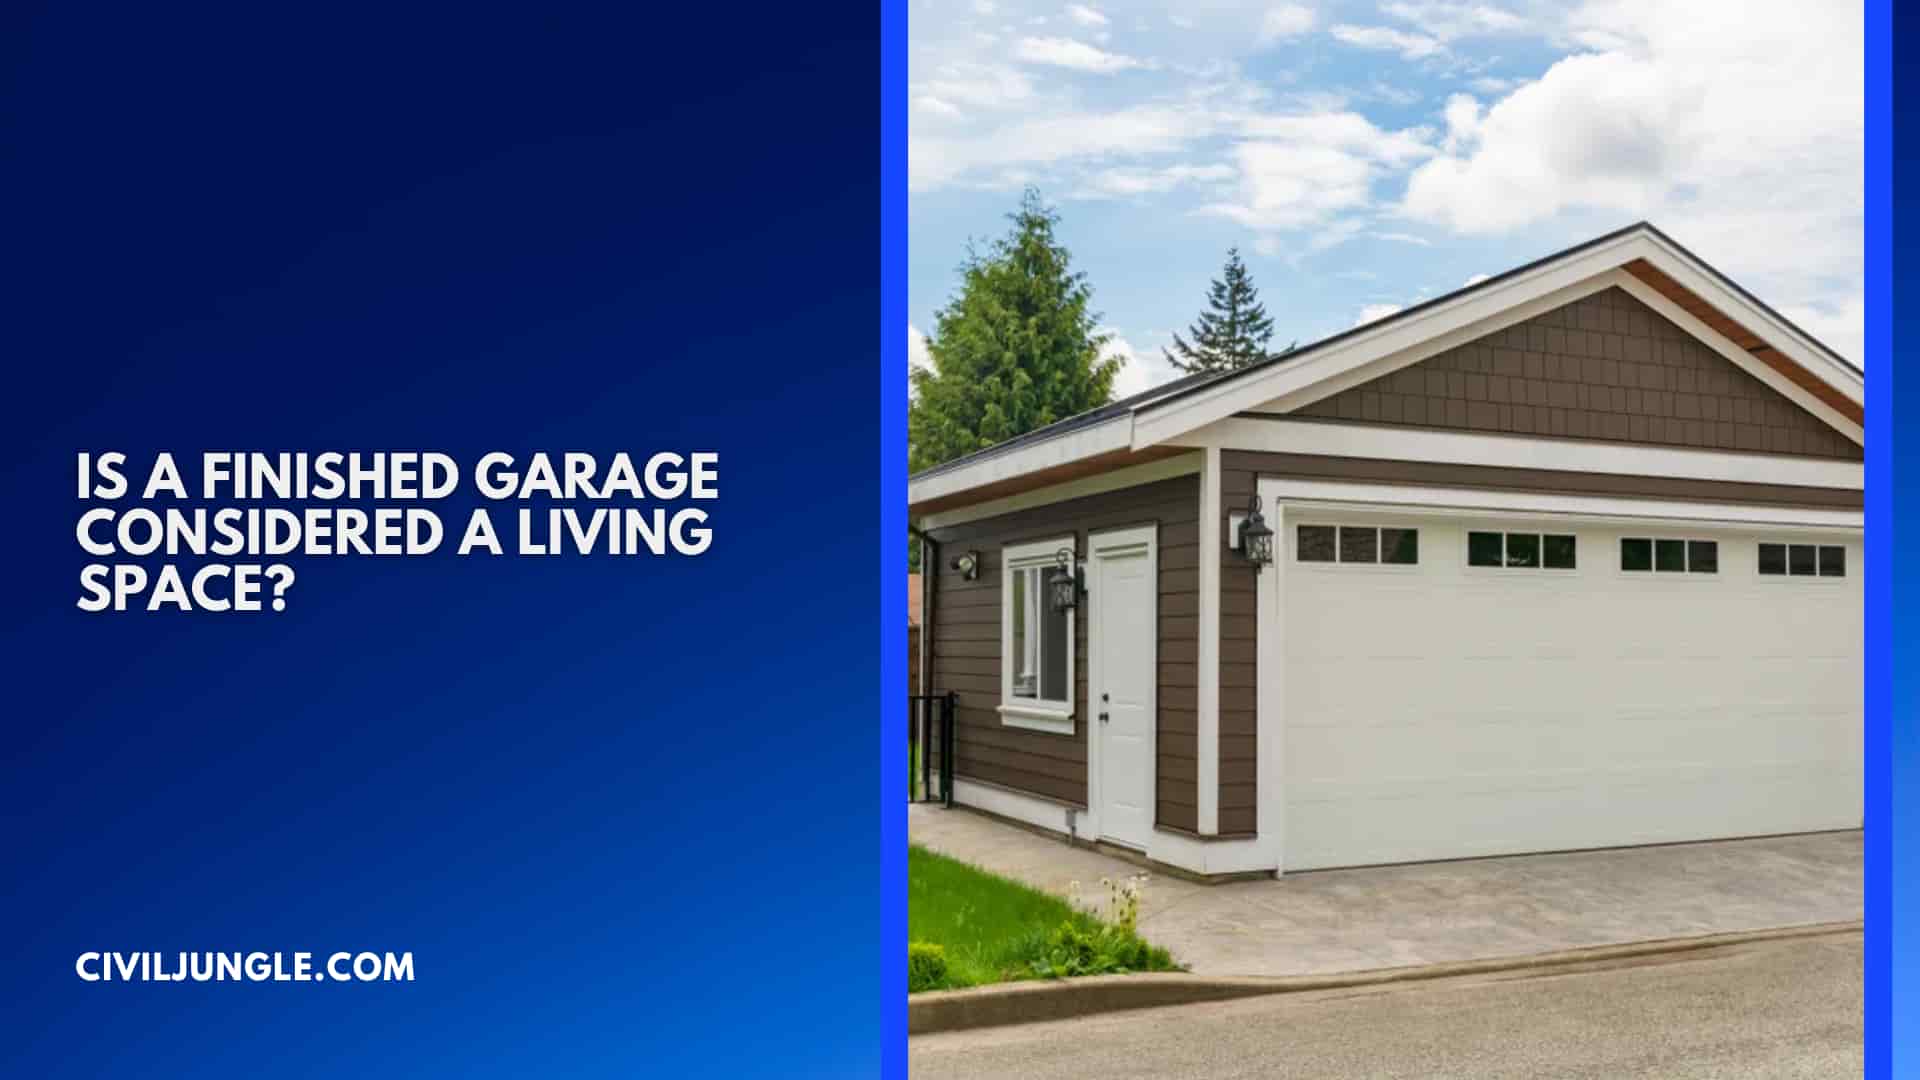 Is a Finished Garage Considered a Living Space?